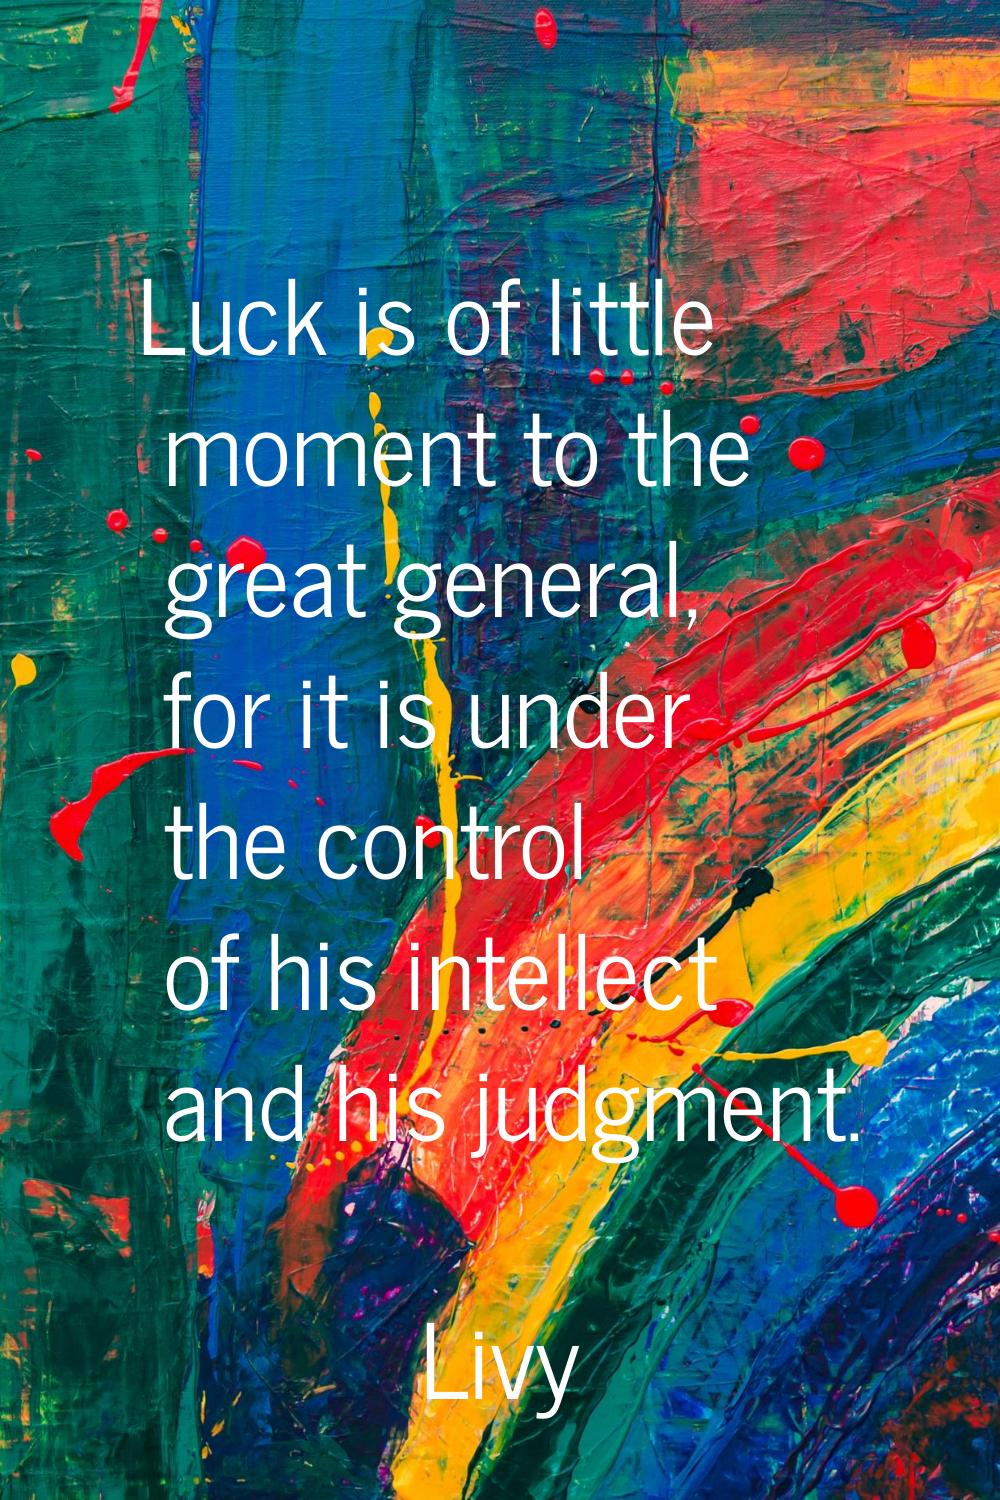 Luck is of little moment to the great general, for it is under the control of his intellect and his